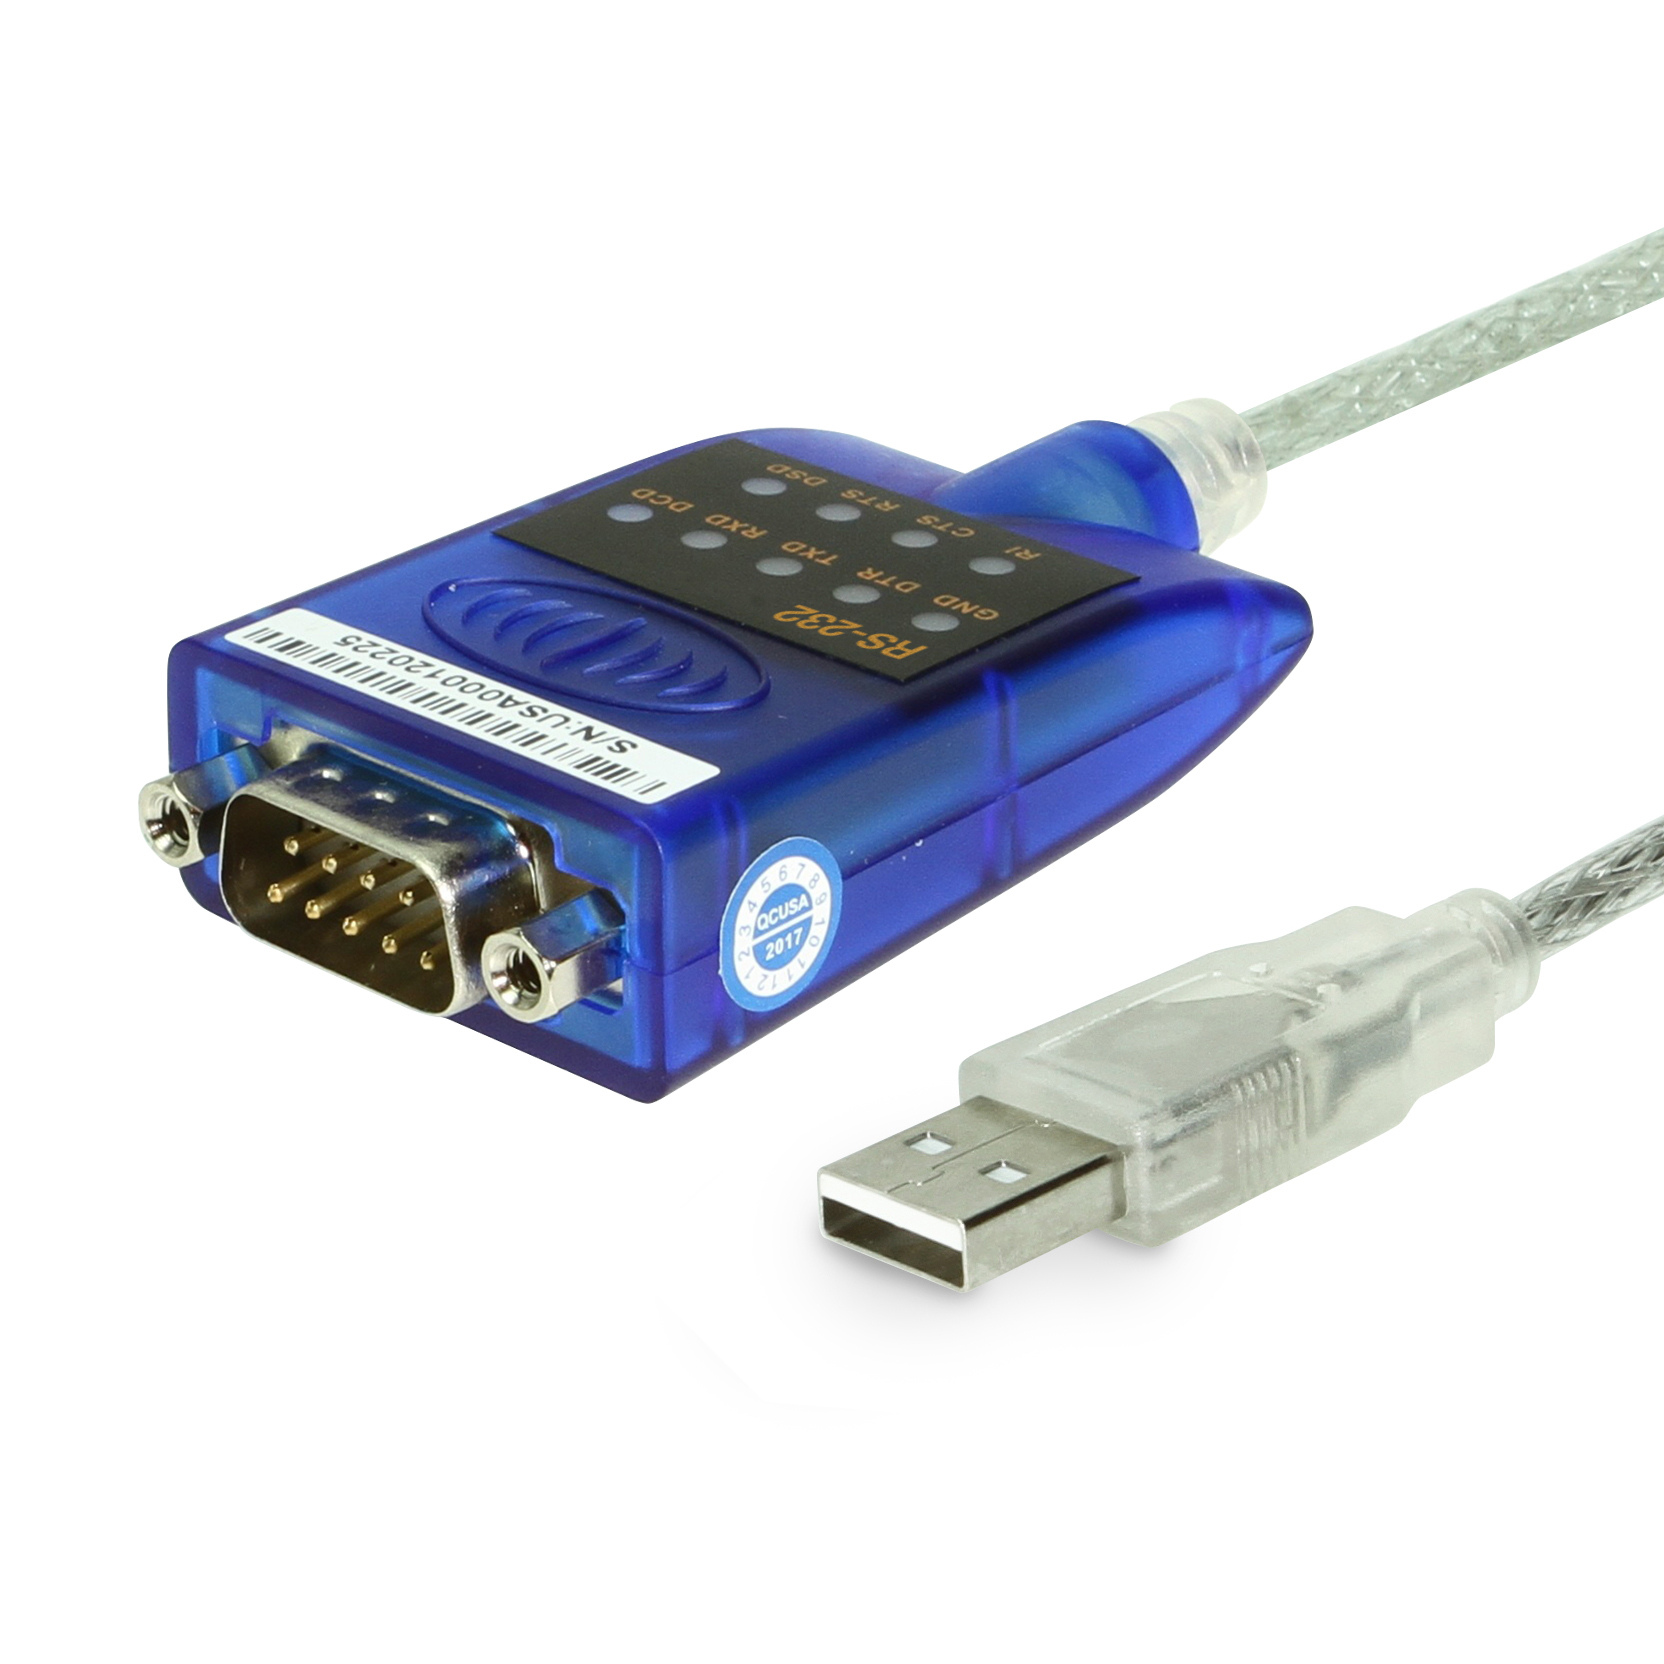 linned Afstem Fortolke USB 2.0 RS-232 Serial Adapter with LED Indicators